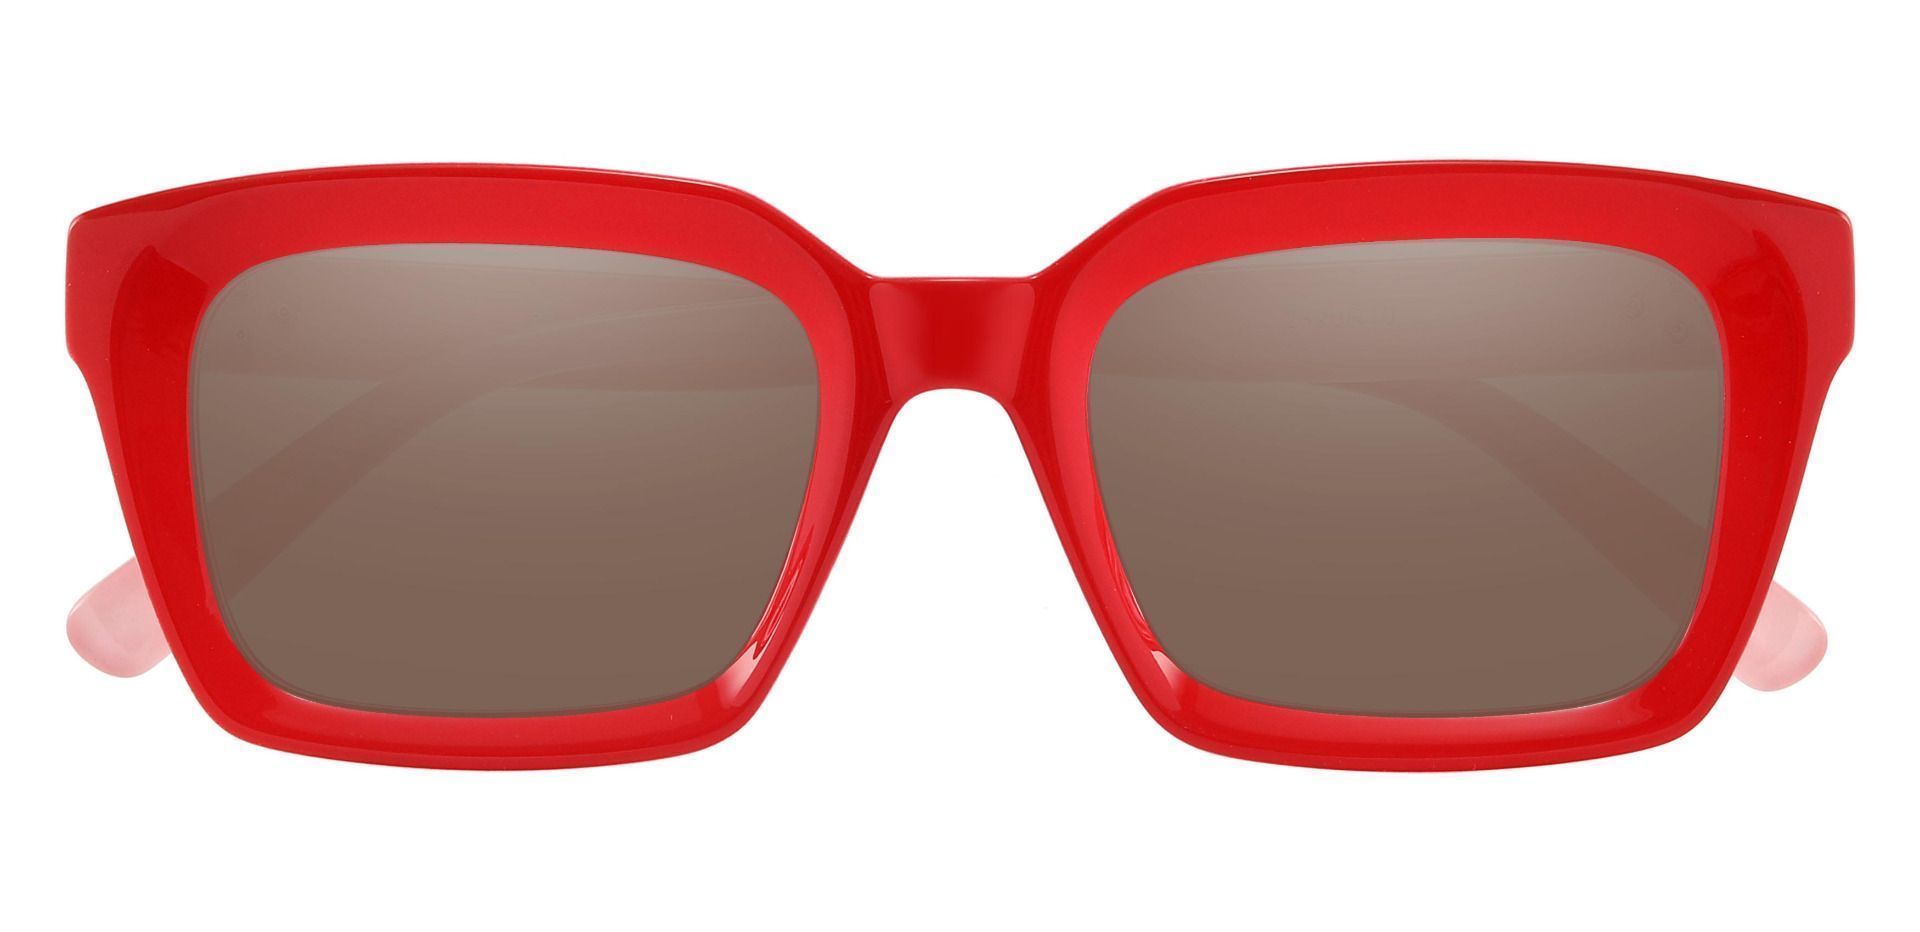 Unity Rectangle Non-Rx Sunglasses - Red Frame With Brown Lenses